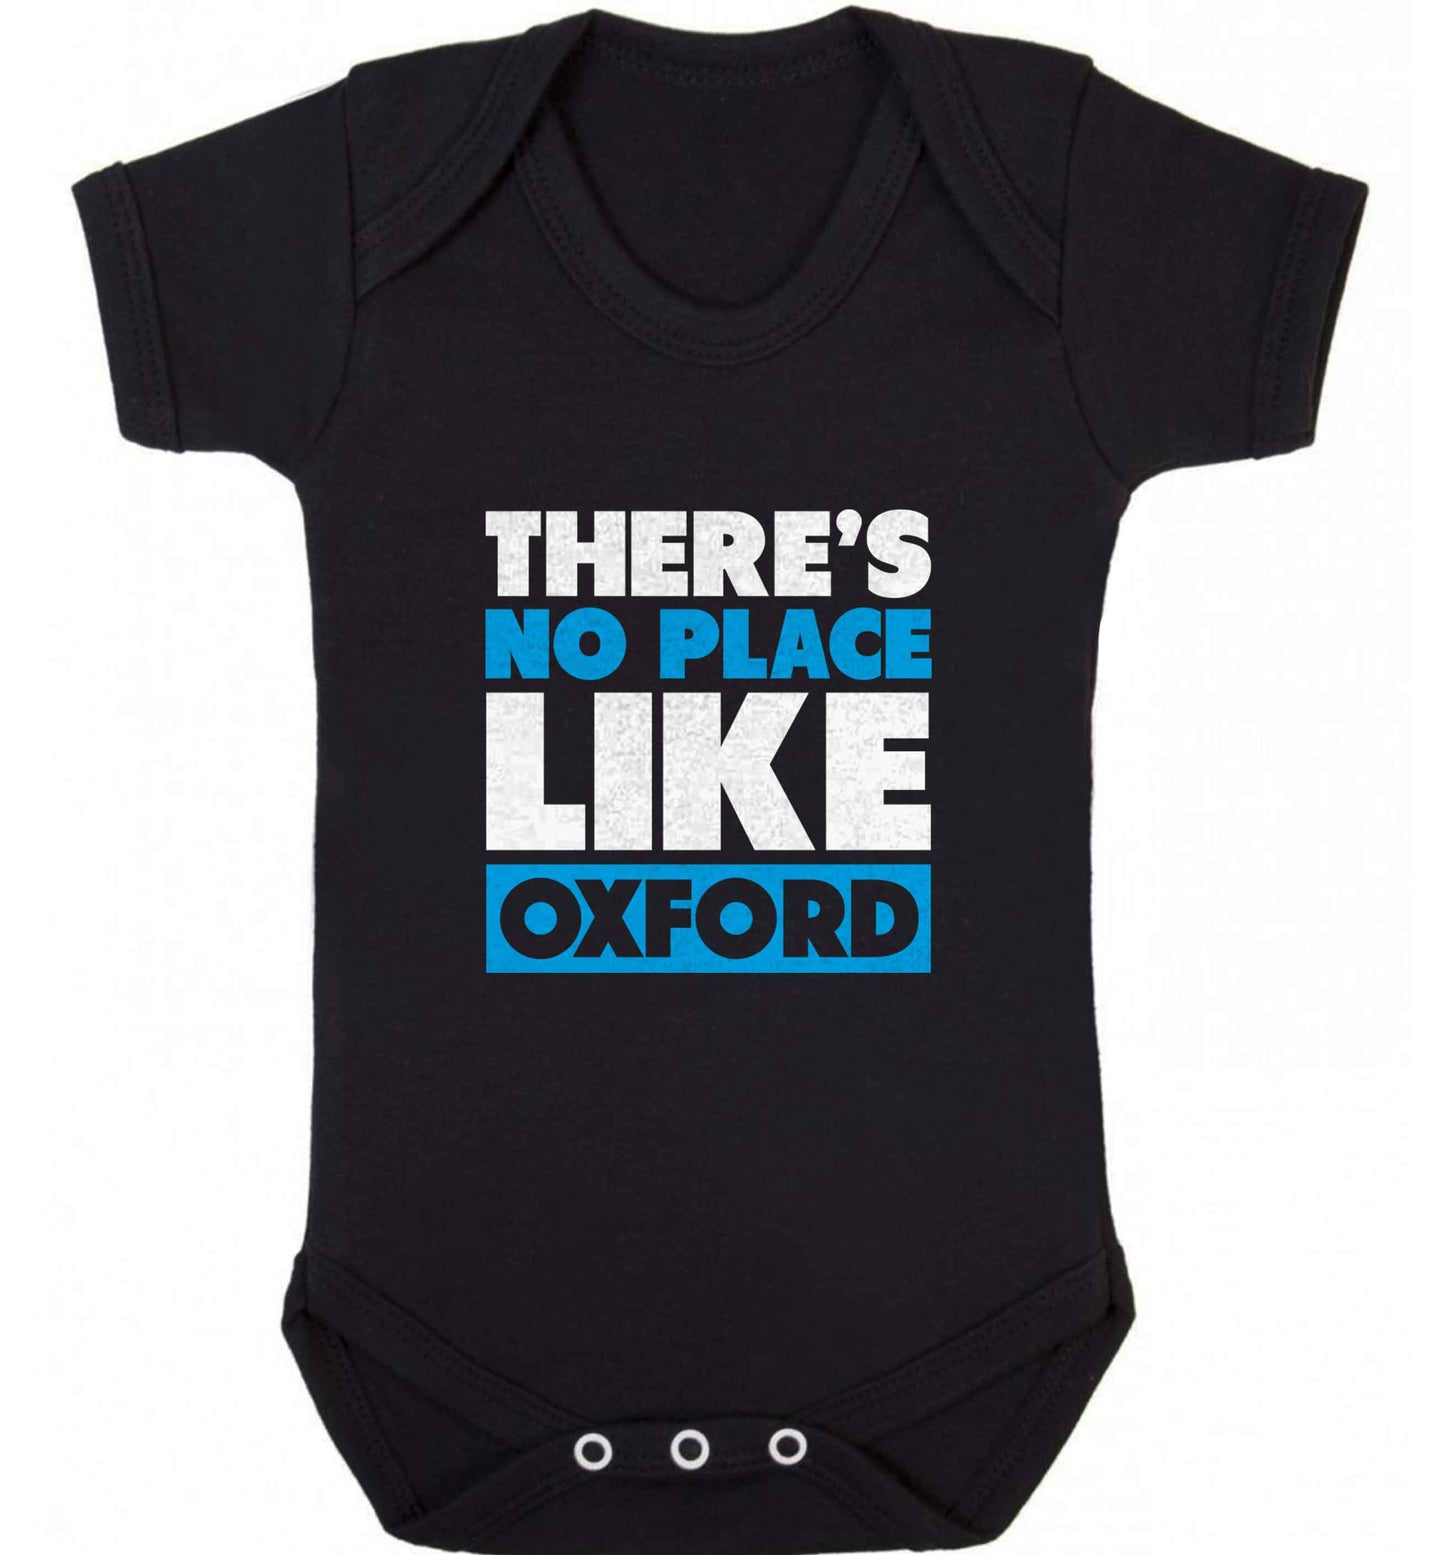 There's no place like Oxford baby vest black 18-24 months